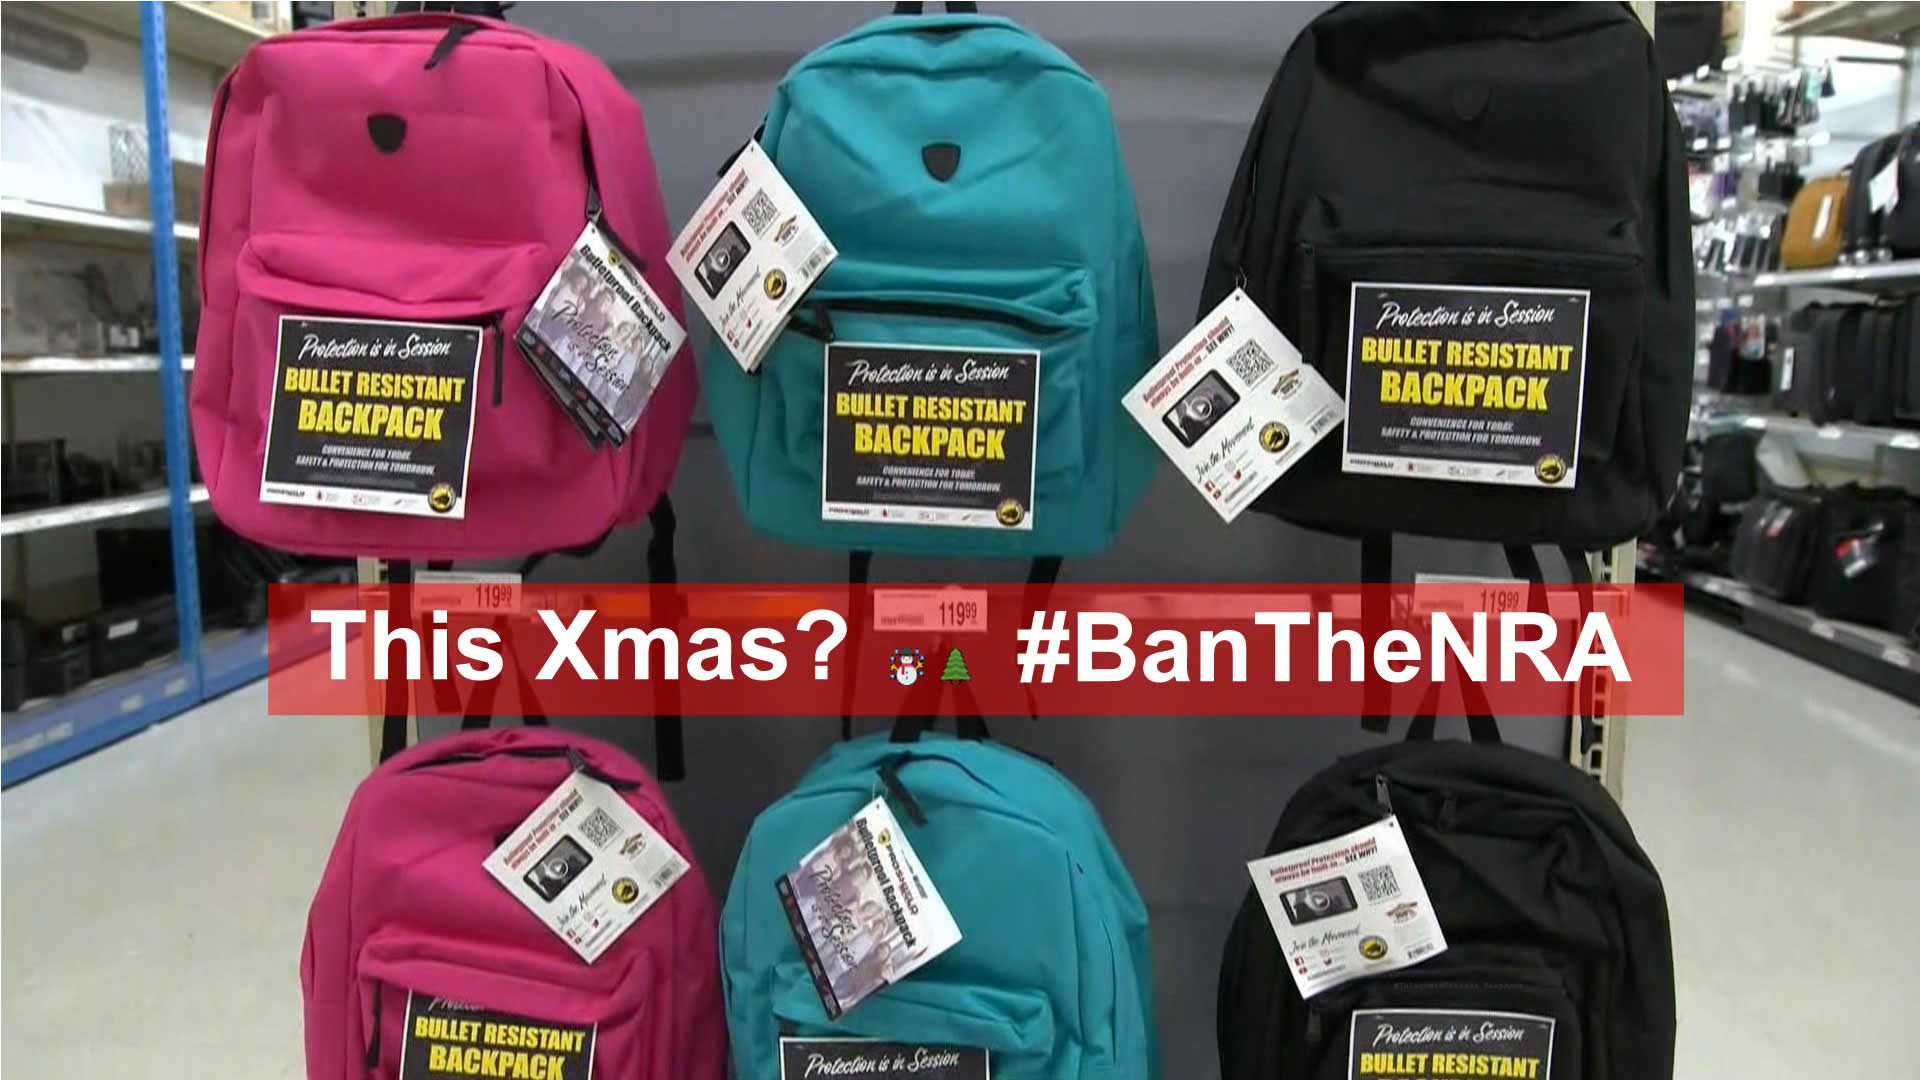 All we want for Xmas this year IS to ban the NRA YAN